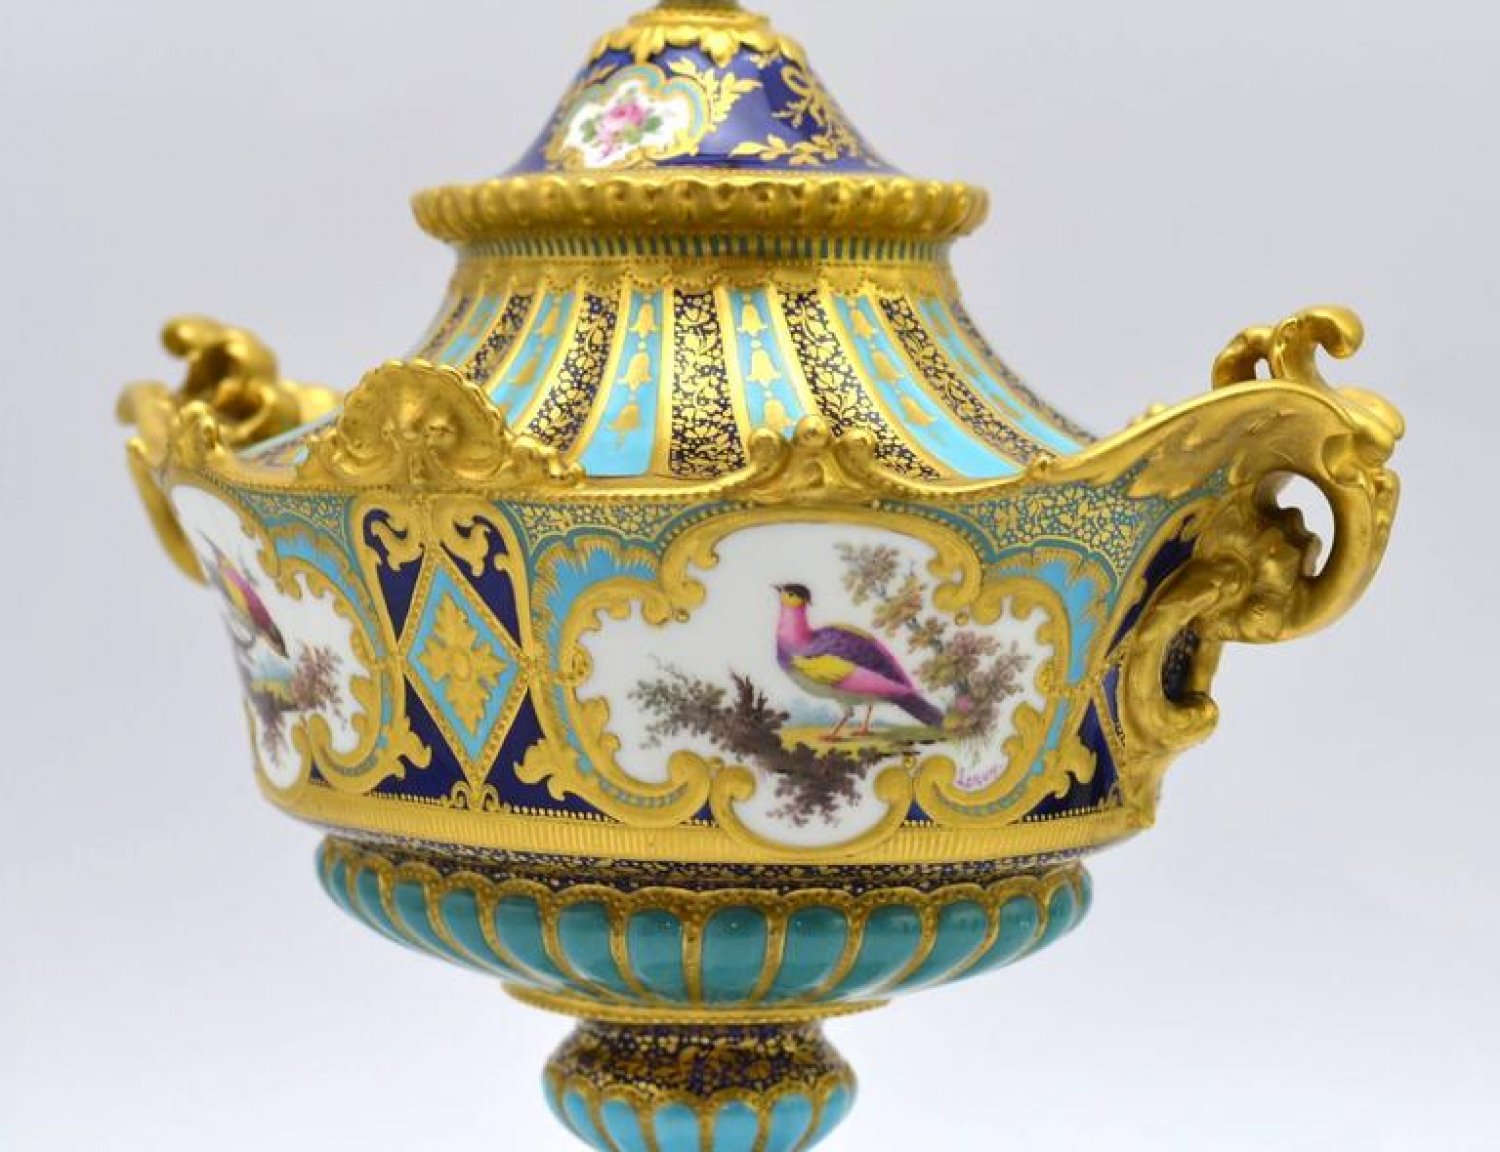 A fine and rare Royal Crown Derby vase, by Desire Leroy 1897